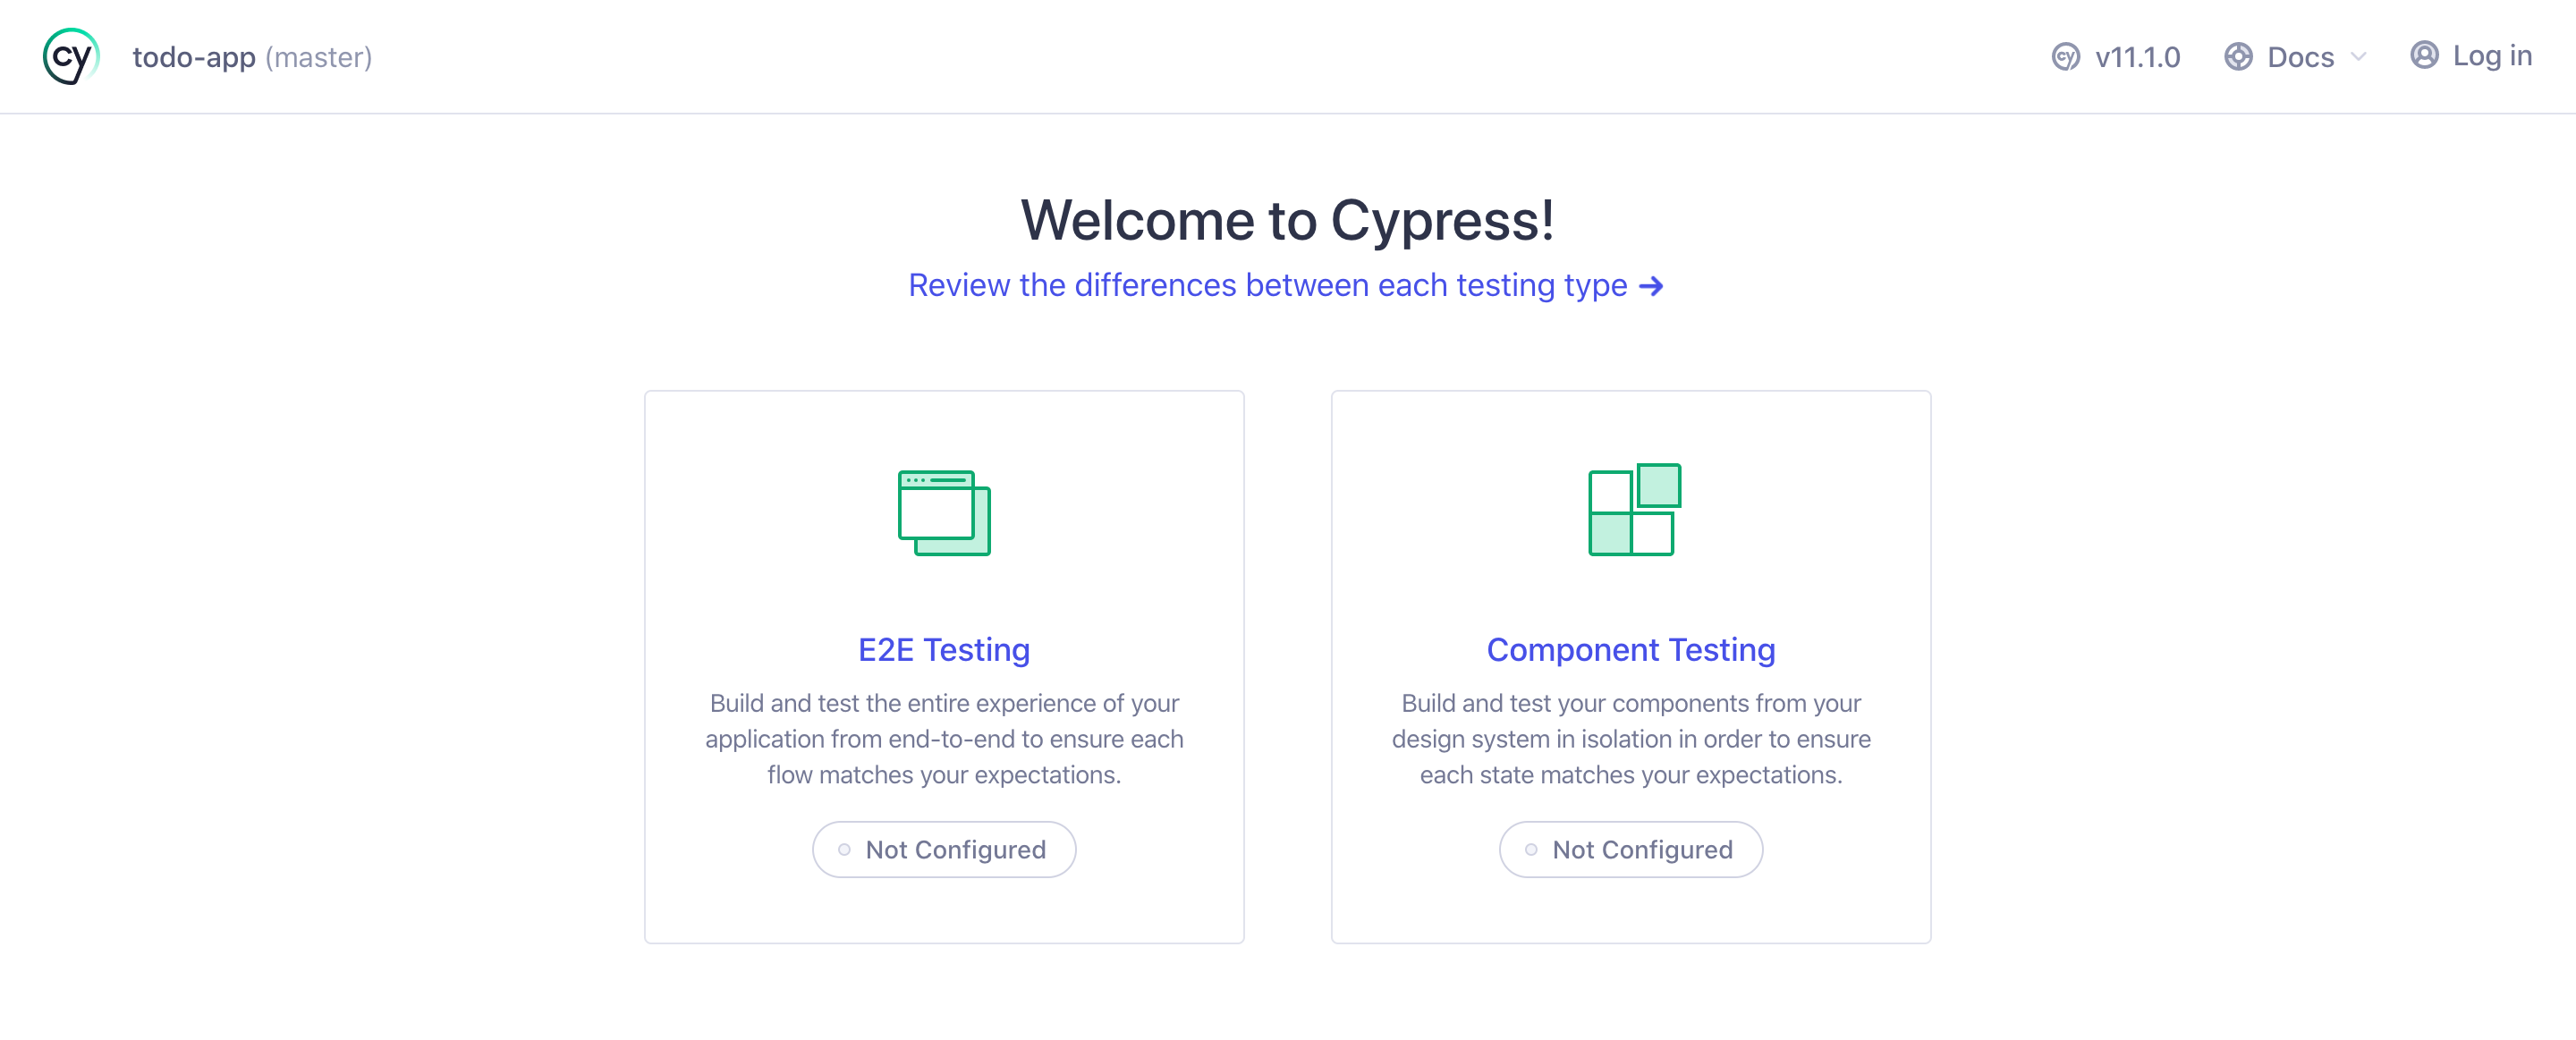 Screenshot of Cypress launcher window displaying testing options. The header reads “todo-app (master)”. The body reads “Welcome to Cypress!”, and has a link reading “Review the differences between each testing type”. Two boxes read “E2E Testing” and “Component Testing”, both with buttons reading “Not Configured” next to an unfilled circle.